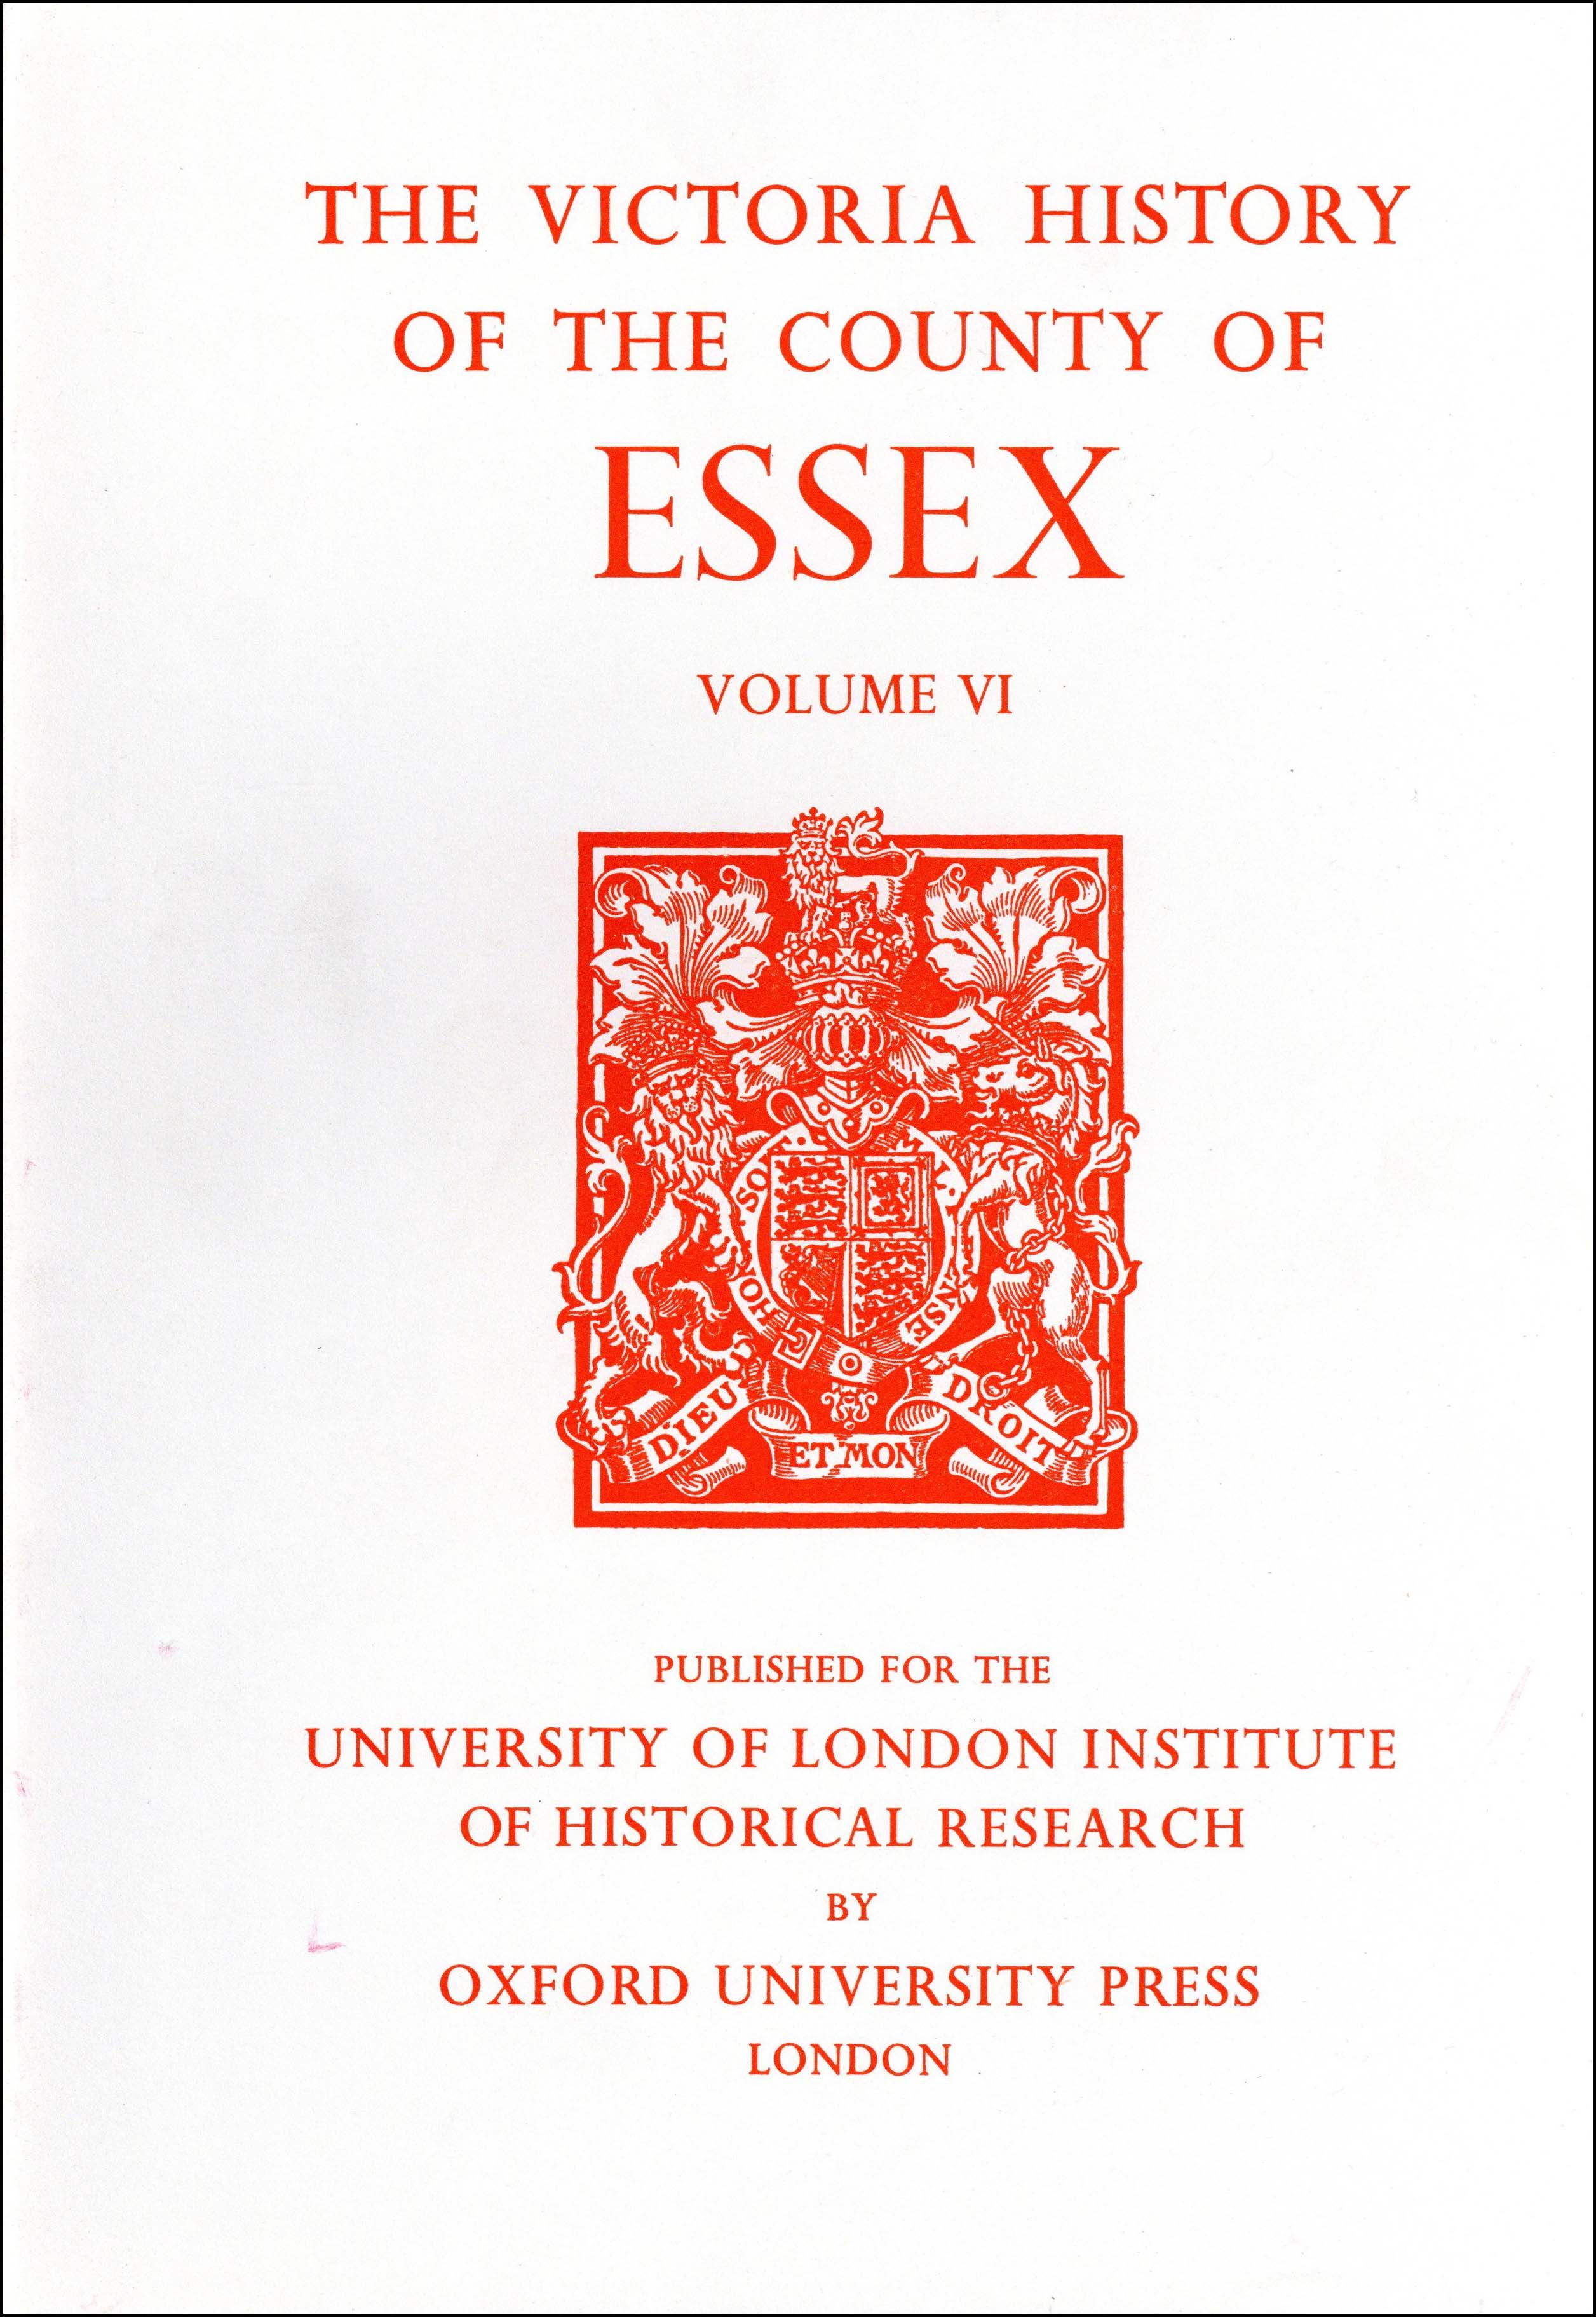 The Victoria History of the County of Essex